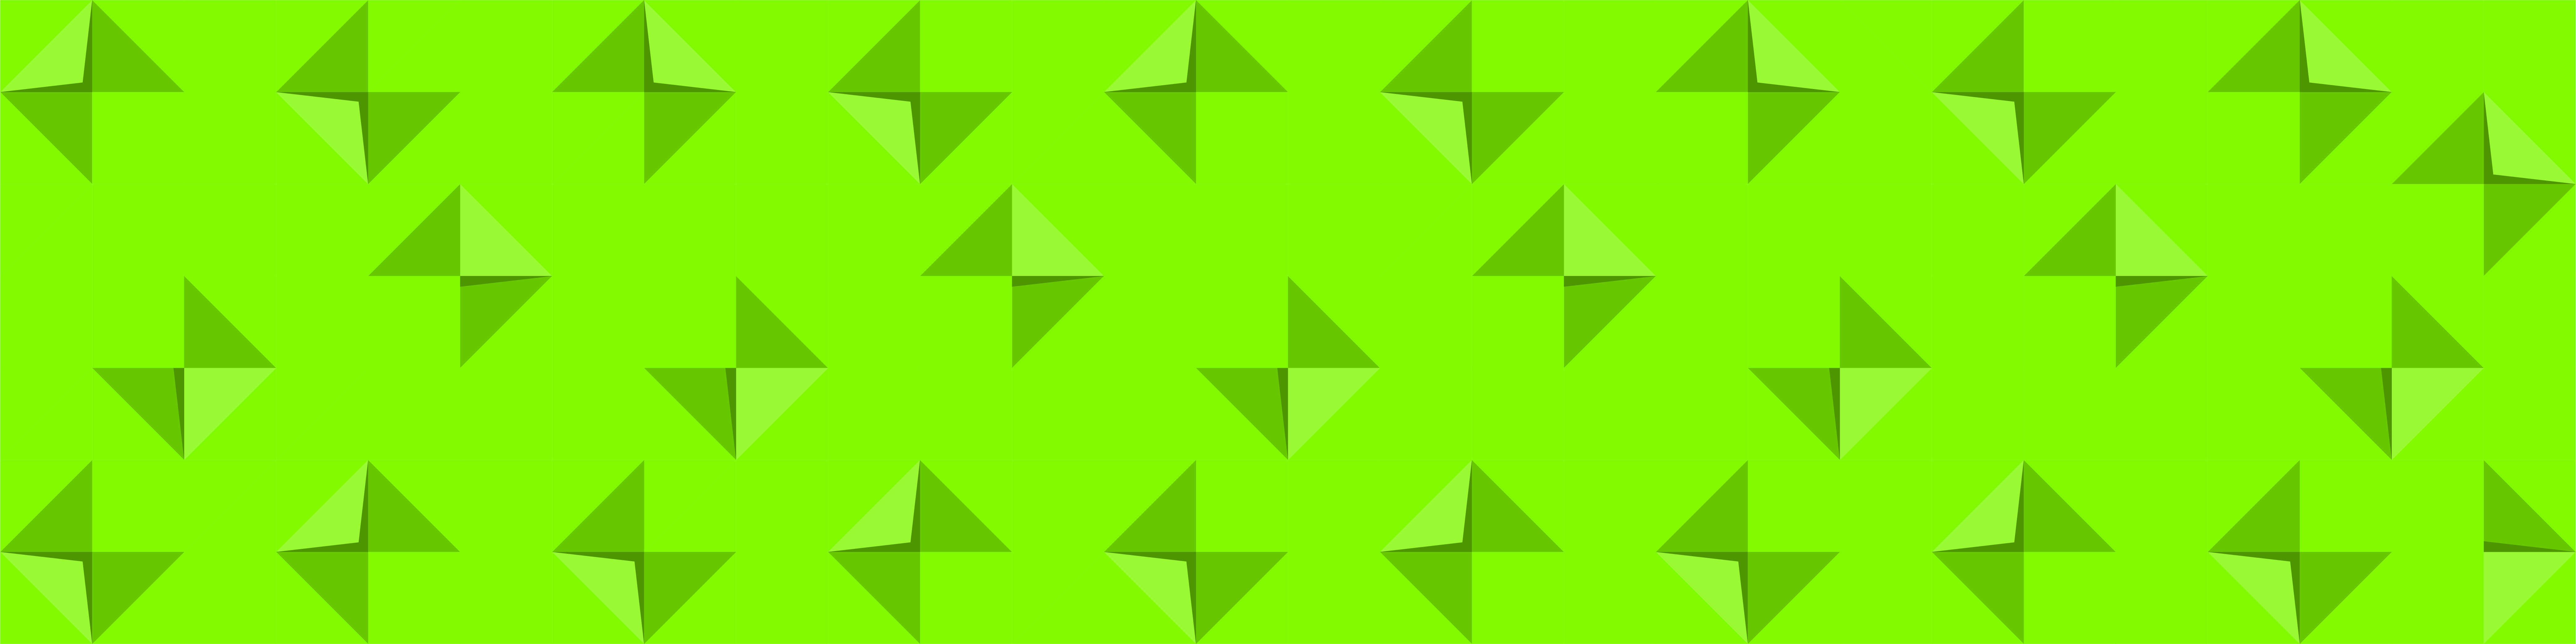 Featured Image Origami Green Lots